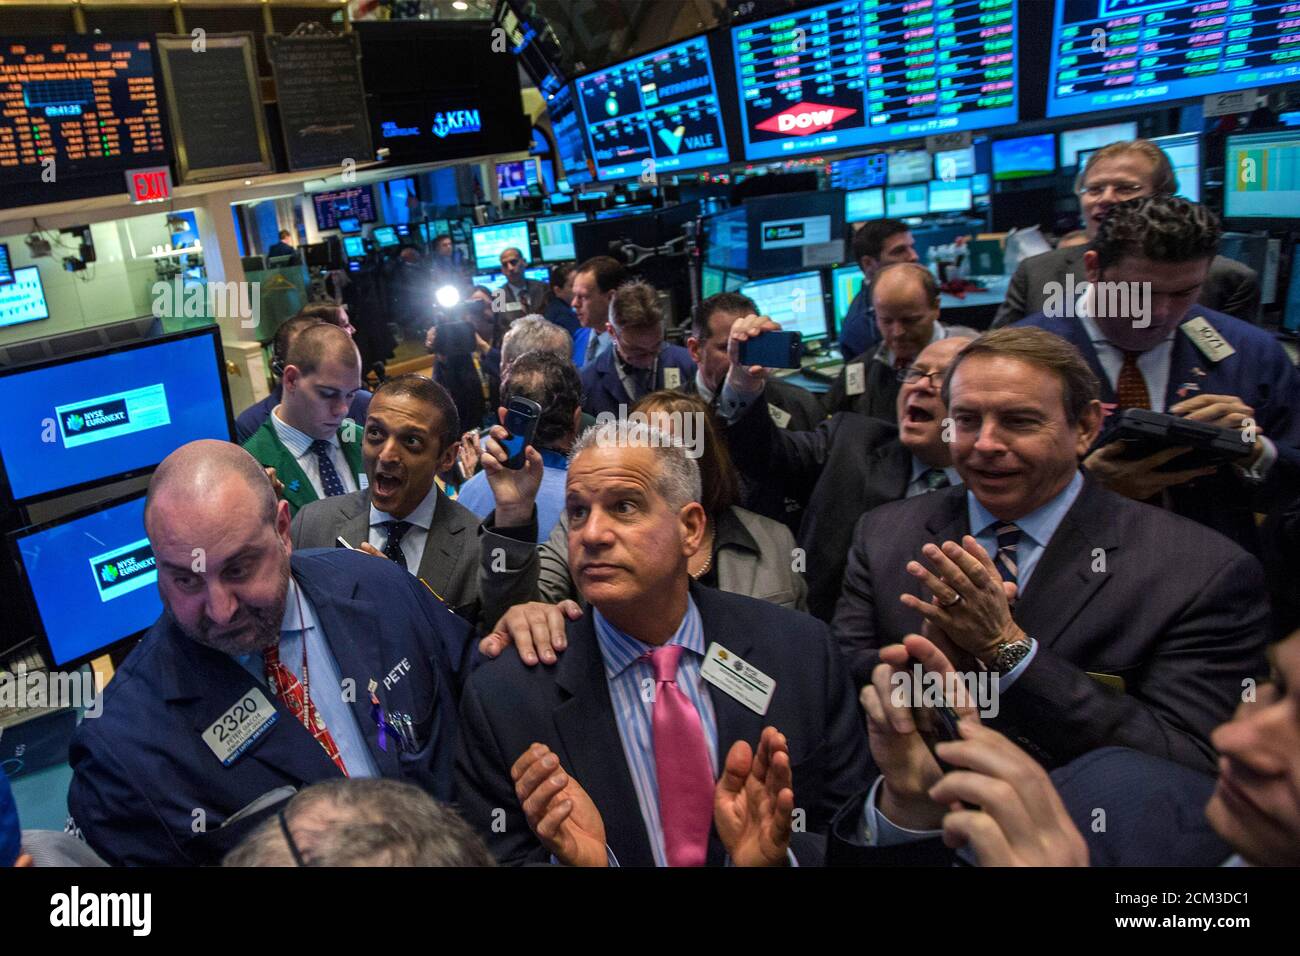 Fidelity & Guaranty Life President and CEO Lee Launer (R) celebrates his company's IPO on the floor of the New York Stock Exchange December 13, 2013. Shares of the insurer, controlled by billionaire Philip Falcone's Harbinger Group Inc, rose as much as 12 percent in their market debut, valuing the company at about $1.07 billion.REUTERS/Brendan McDermid (UNITED STATES - Tags: BUSINESS) Stock Photo